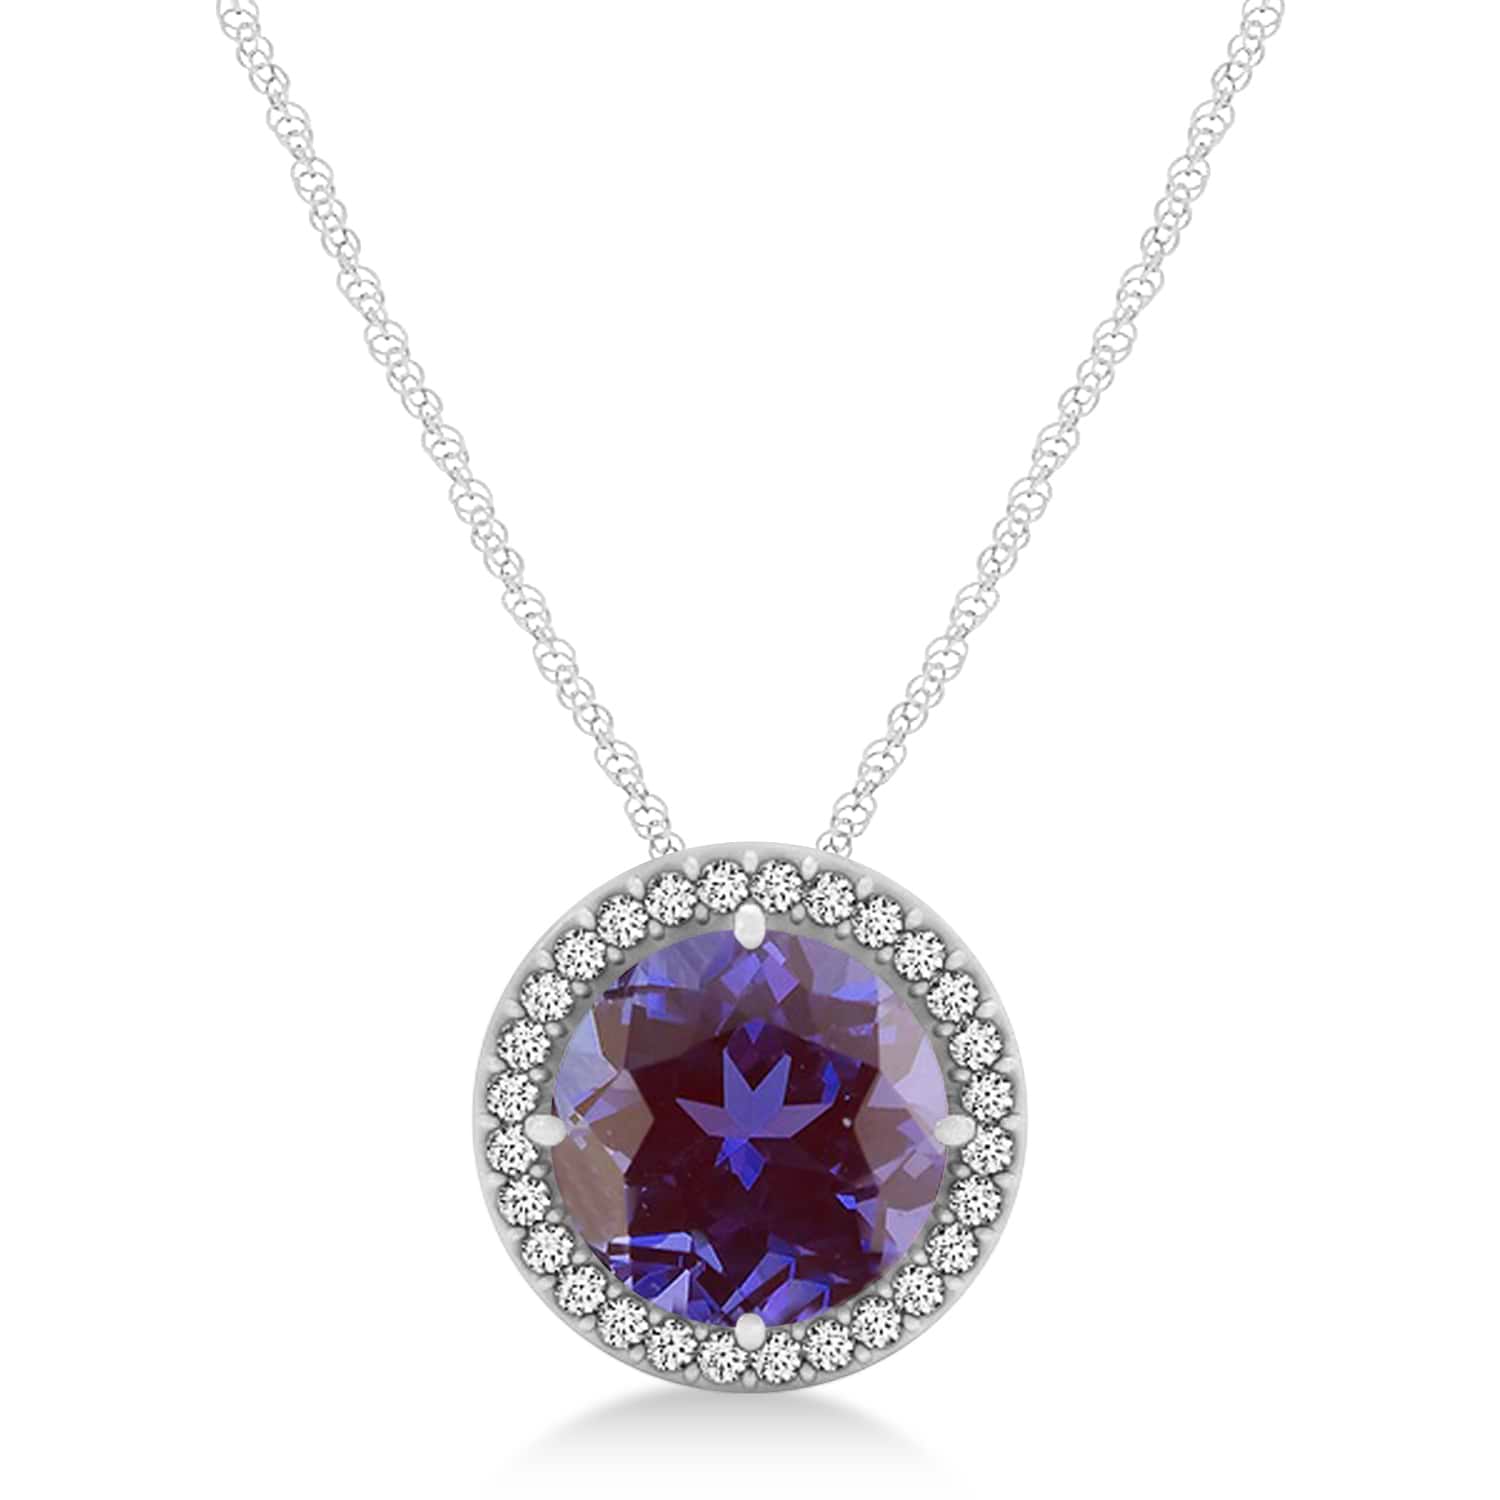 Lab Alexandrite Floating Solitaire Halo Pendant Necklace 14k White Gold (2.04ct)